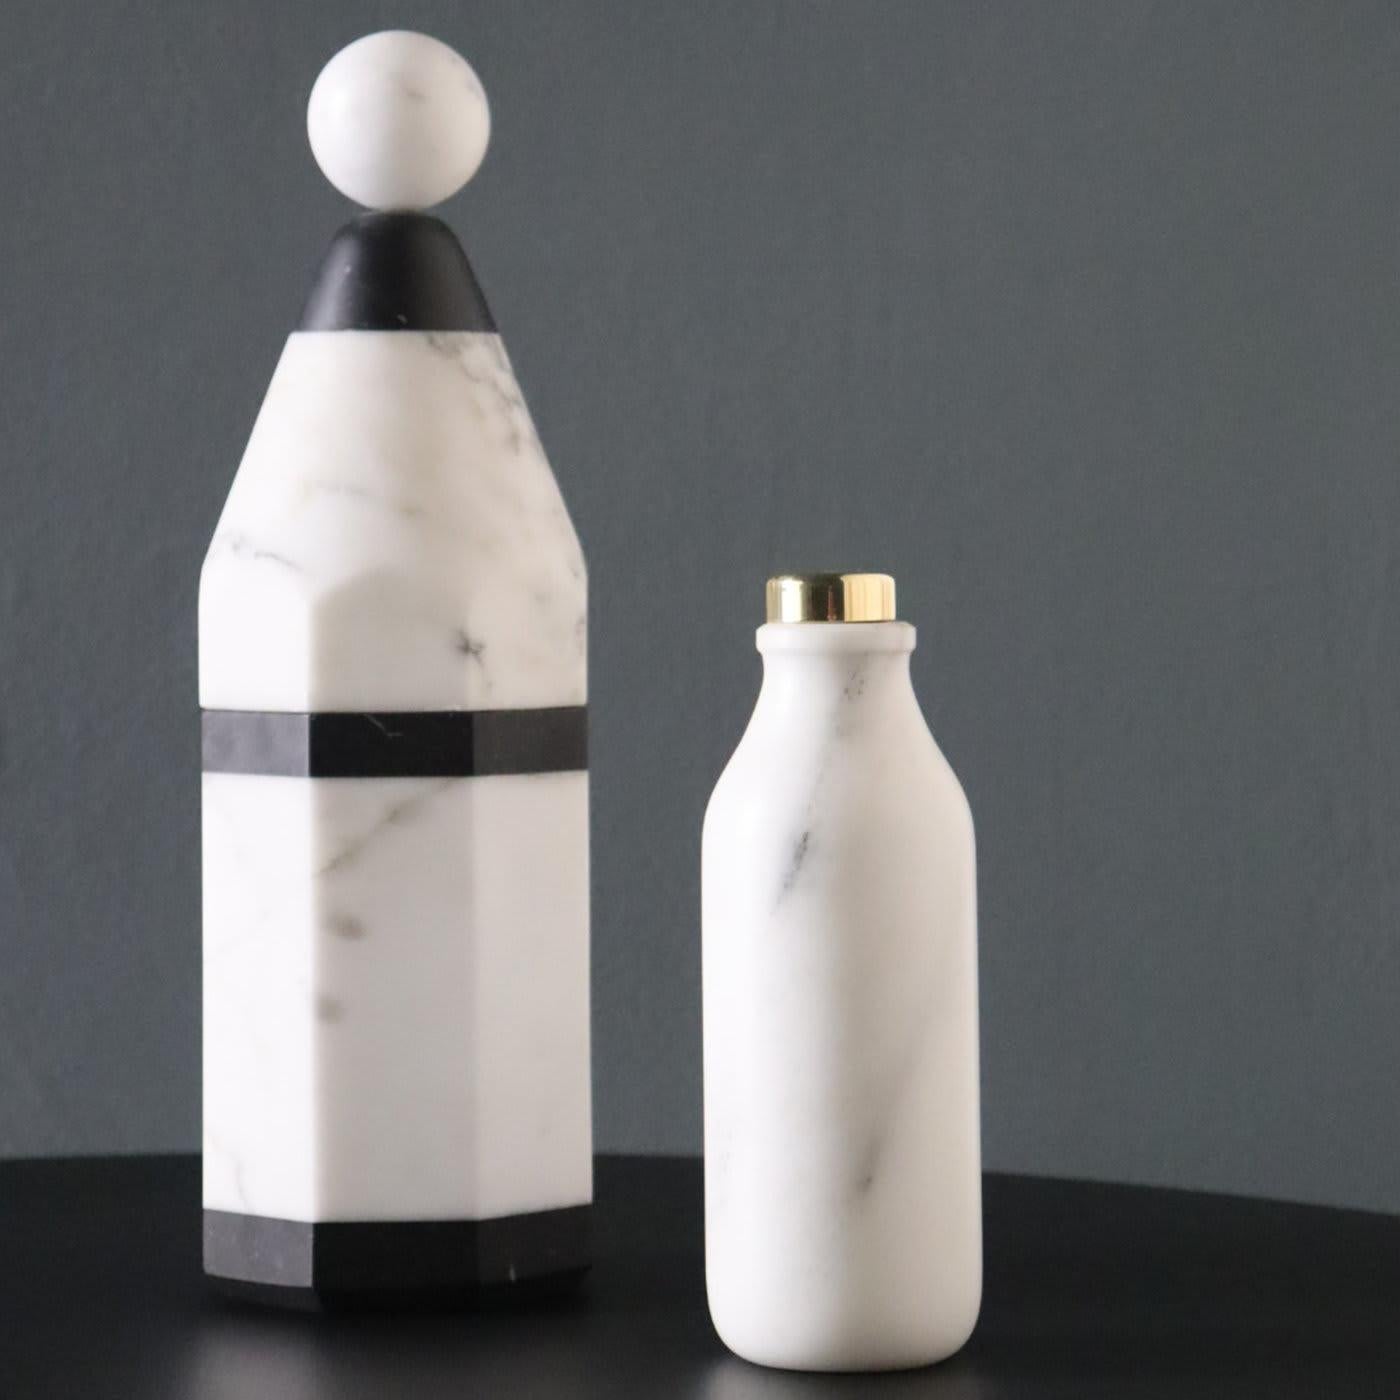 This striking bottle is part of the Coolers collection, featuring a mix of minimalist designs and precious materials, traditional crafting methods, and a contemporary sensibility, resulting in bottles that are stunning to behold and useful, since